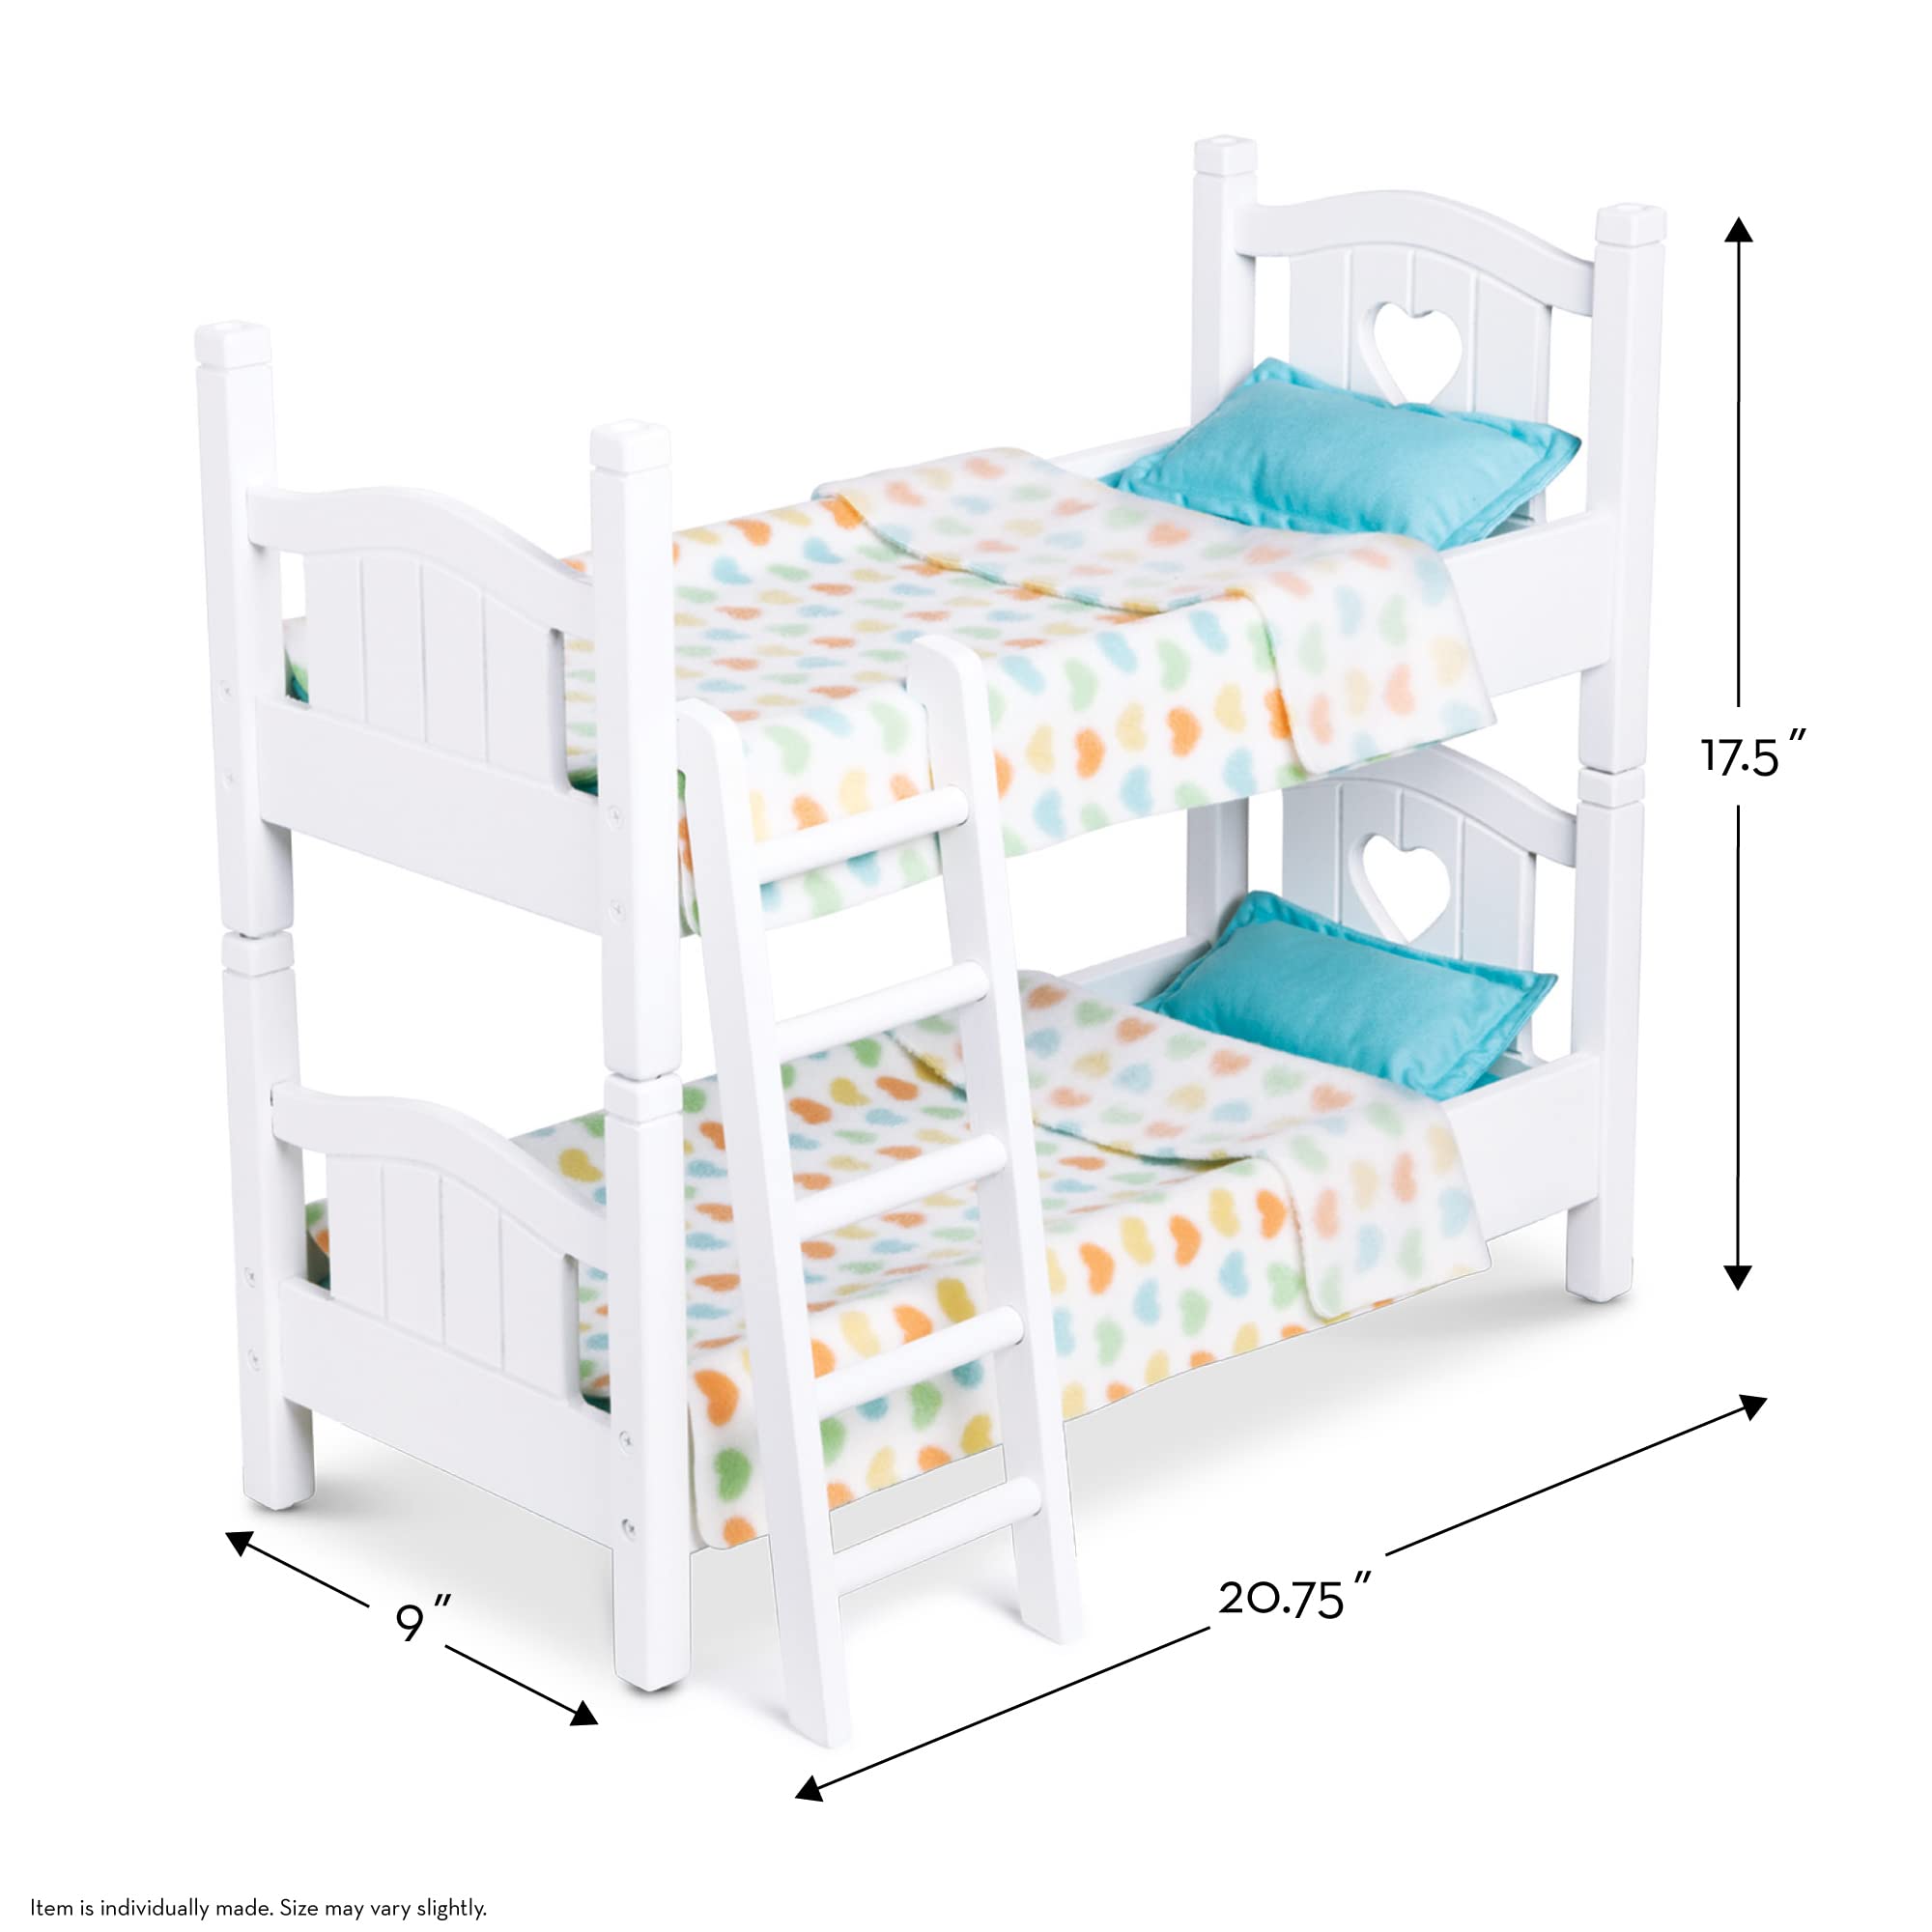 Melissa & Doug Mine to Love Wooden Play Bunk Bed for Dolls up to 18 inches-Stuffed Animals - White (2 Beds, 17.4”H x 9.1”W x 20.7”L Assembled and Stacked)